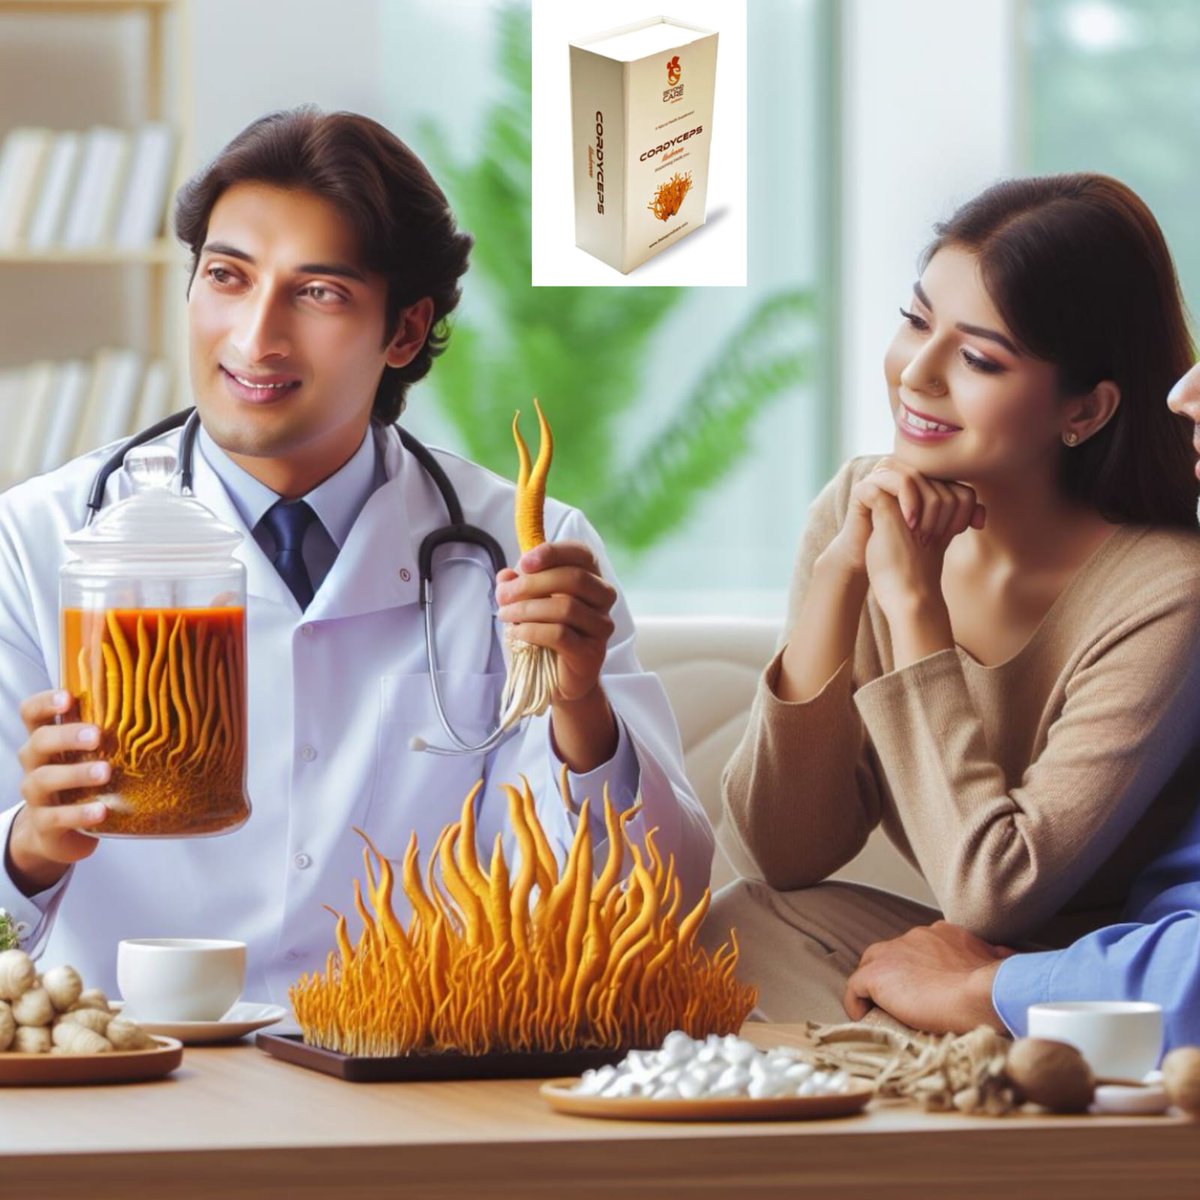 #bloodsugar
#cordycepsmilitaris
Cordyceps militaris, has been studied for its potential anti-diabetic properties. Research suggests that it helps stabilize blood glucose levels during fasting and prevent insulin spikes after sugar intake.